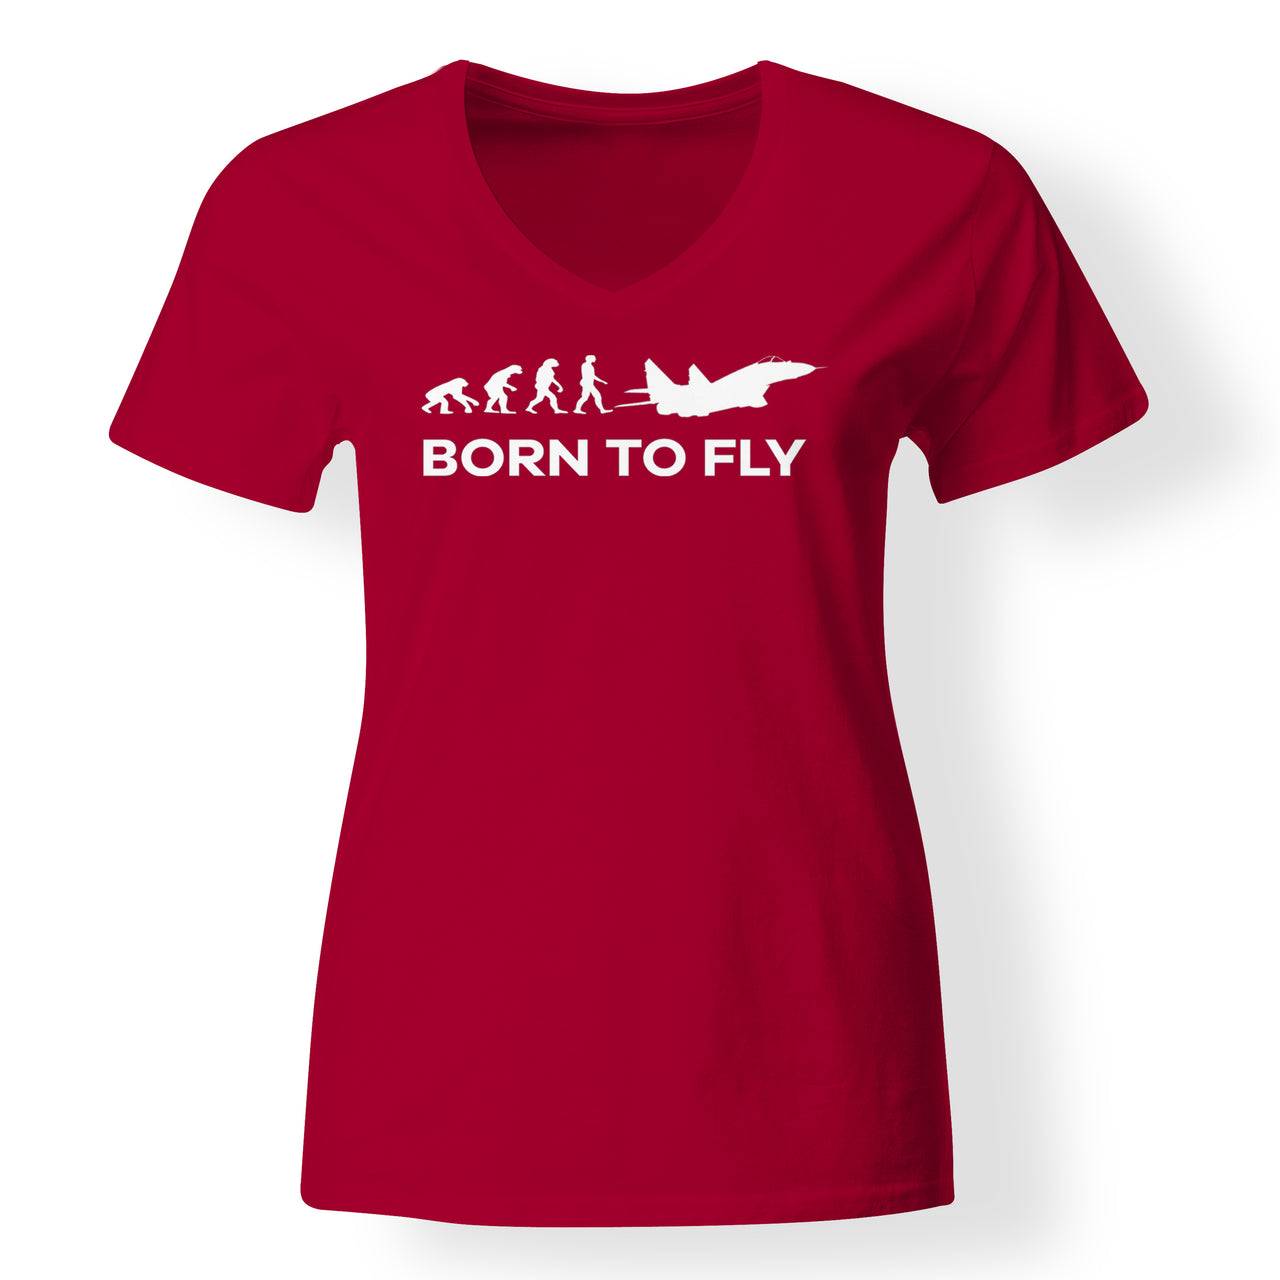 Born To Fly Military Designed V-Neck T-Shirts